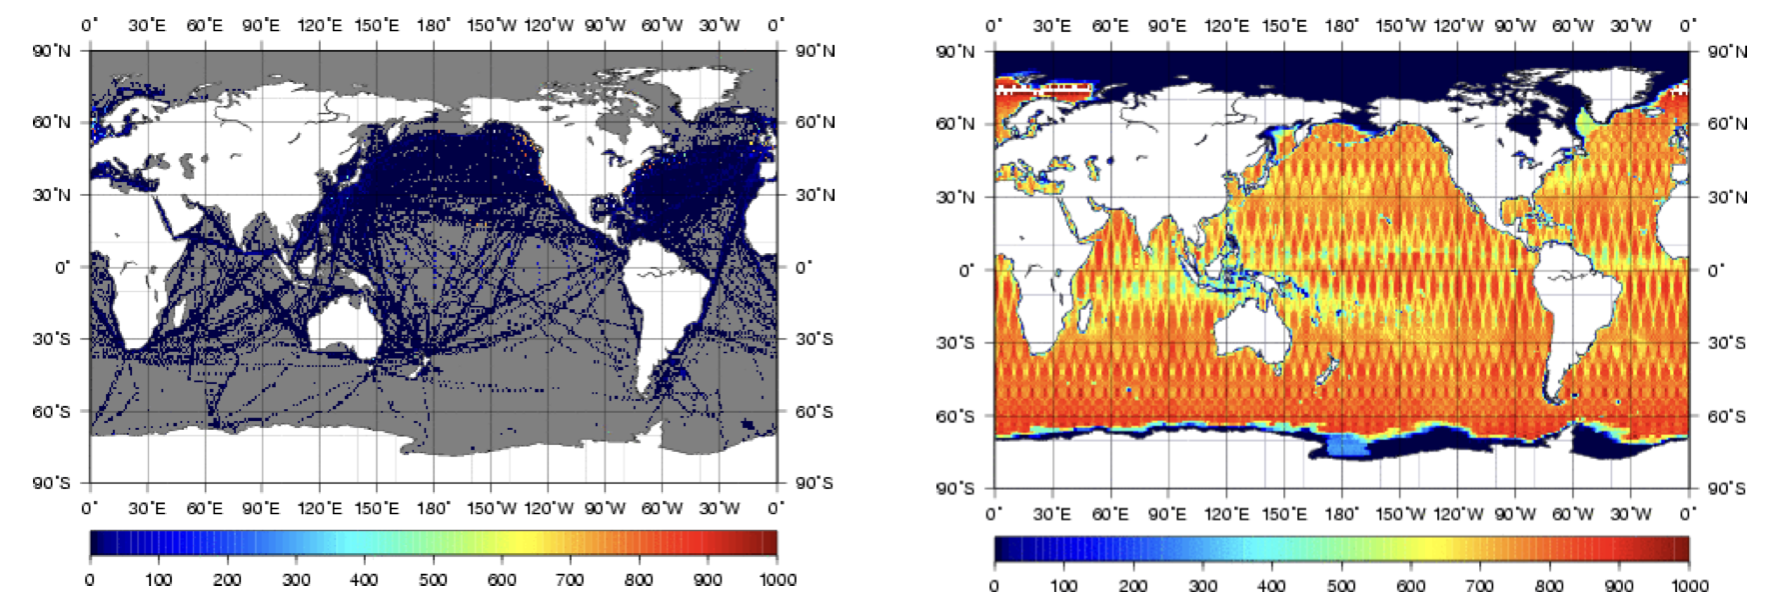 Figures showing the air-sea fluxes observed by ship (left) and satellite (right). There are gaps in the ship observations, while the satellites observe a wide area without a gap.